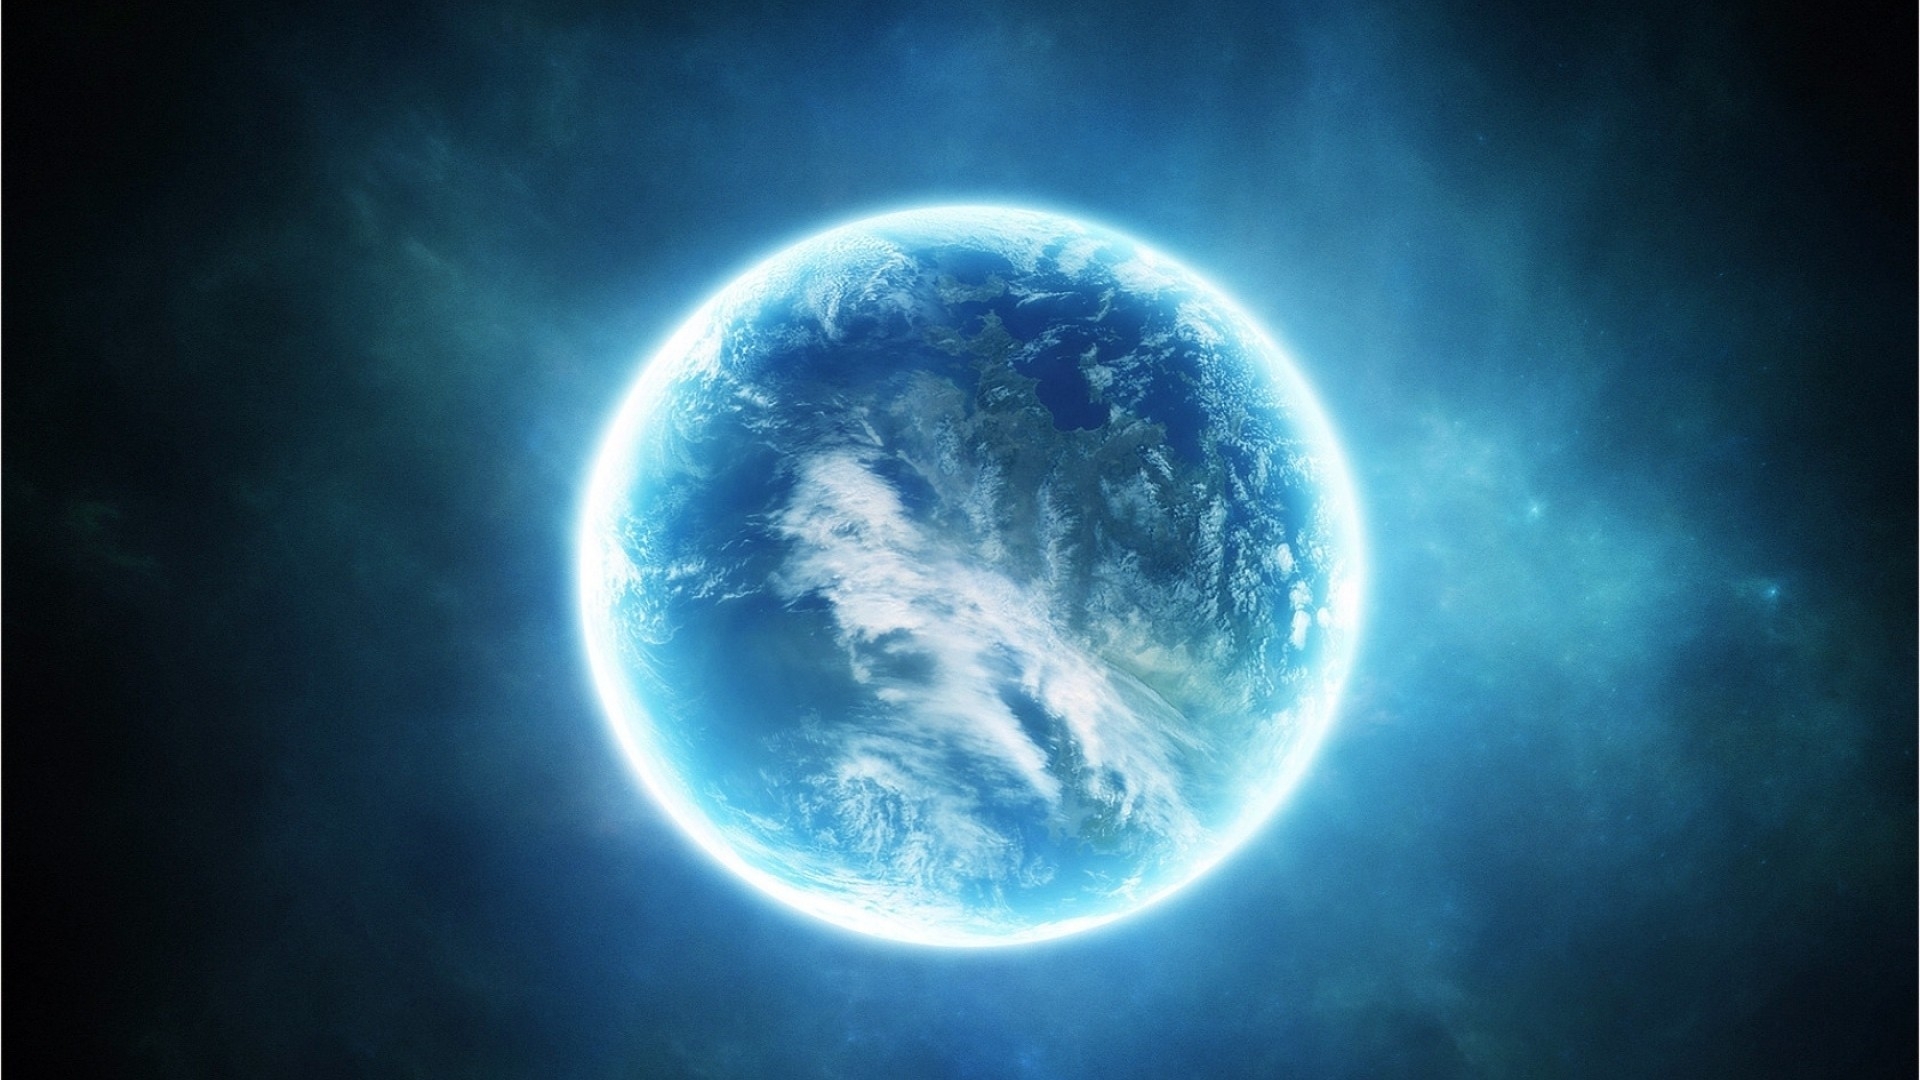 Planet Poster for 1920 x 1080 HDTV 1080p resolution